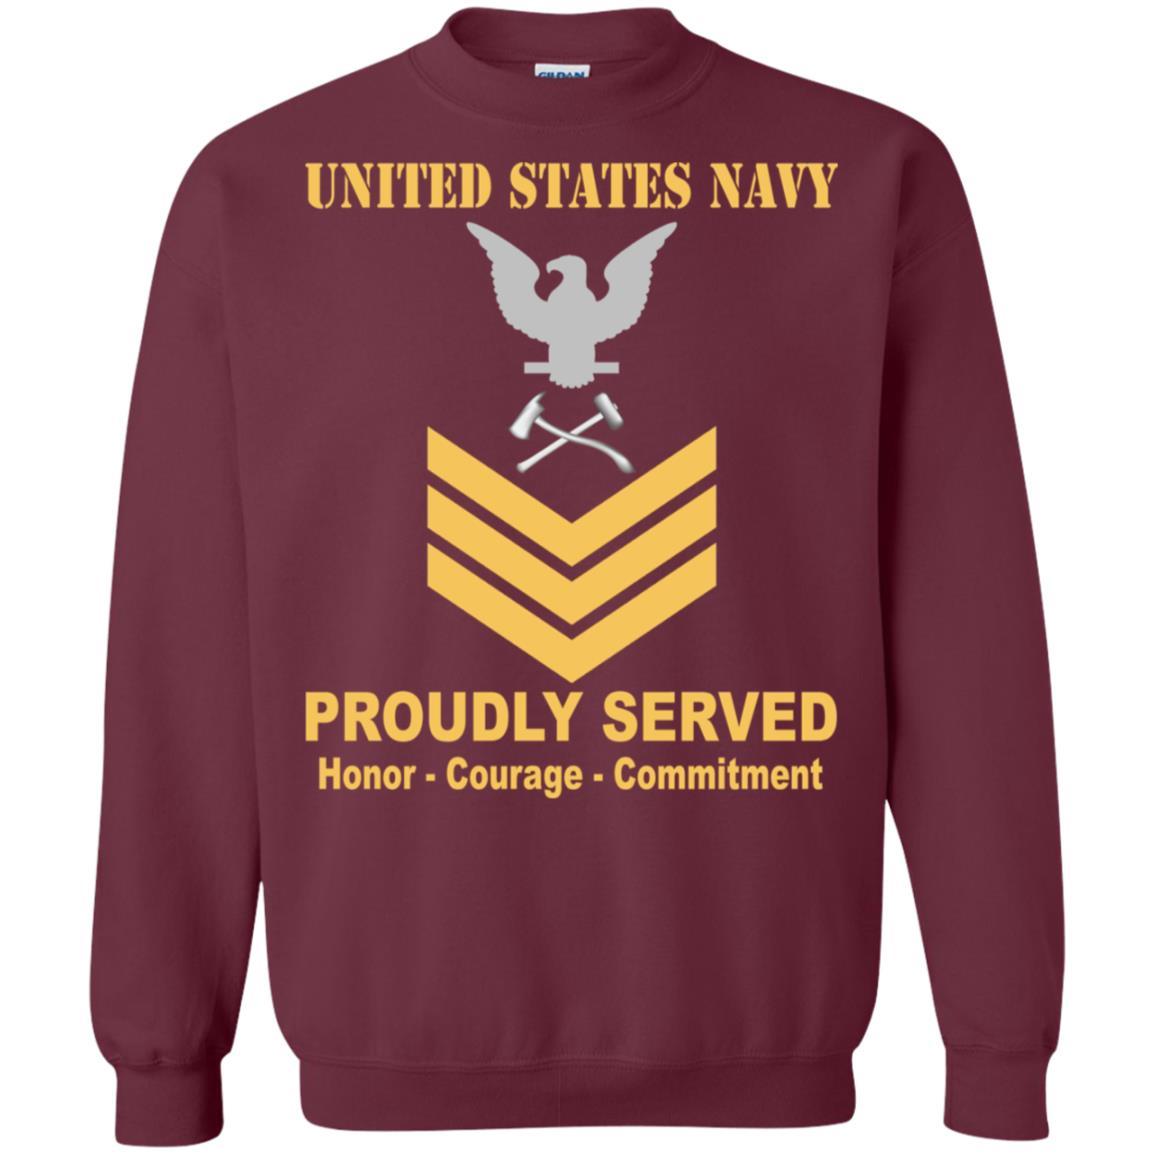 Navy Damage Controlman Navy DC E-6 Rating Badges Proudly Served T-Shirt For Men On Front-TShirt-Navy-Veterans Nation